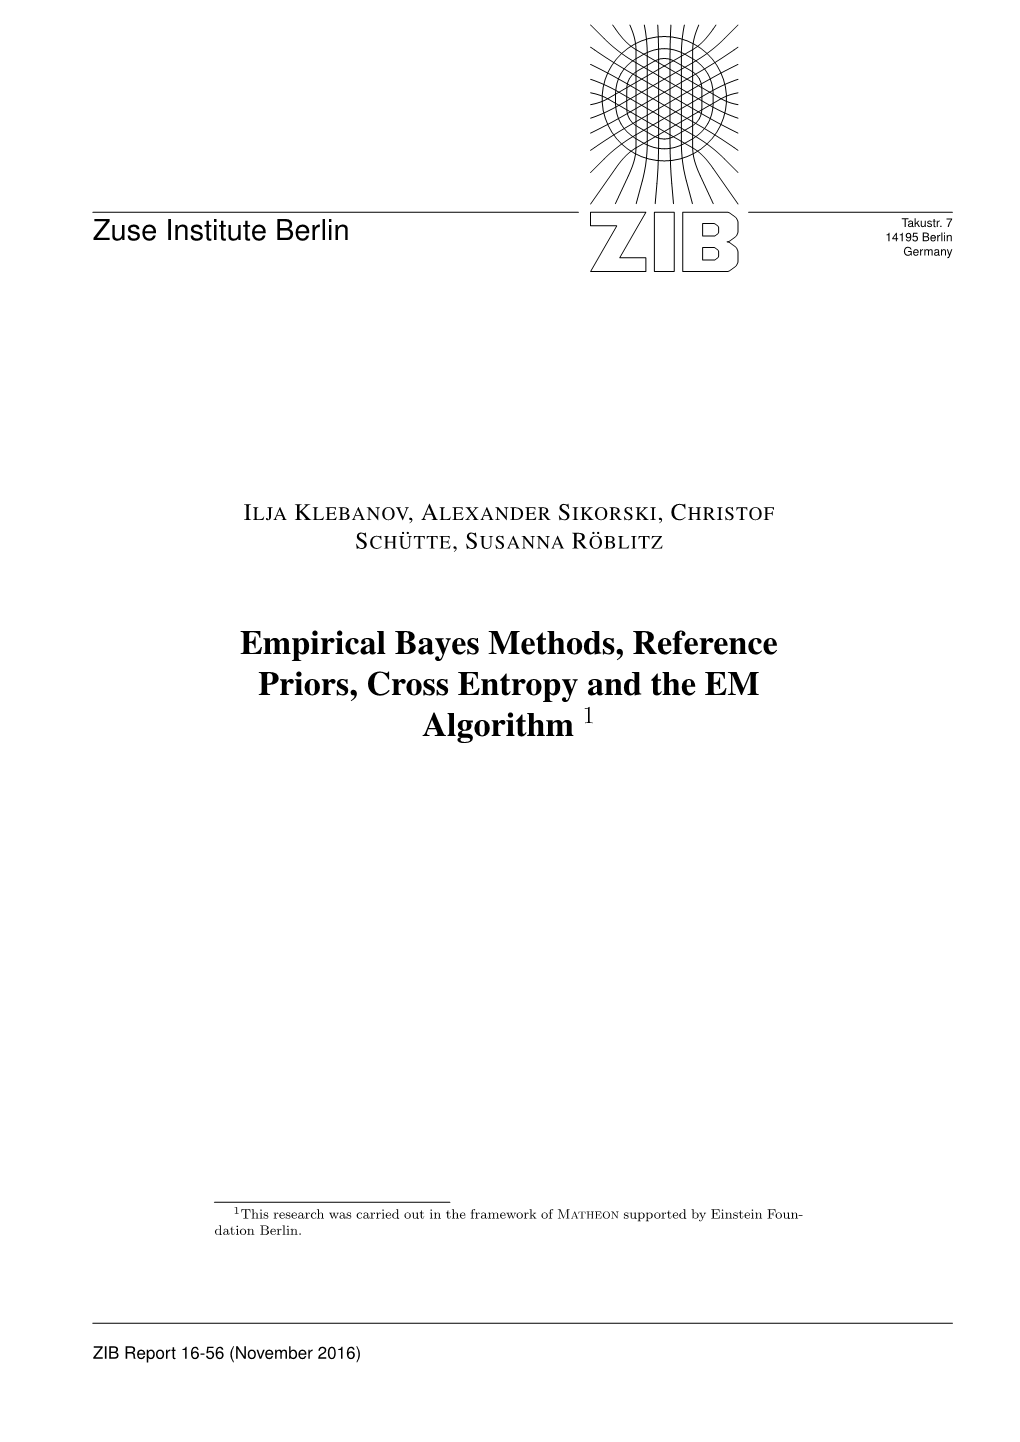 Empirical Bayes Methods, Reference Priors, Cross Entropy and the EM Algorithm 1